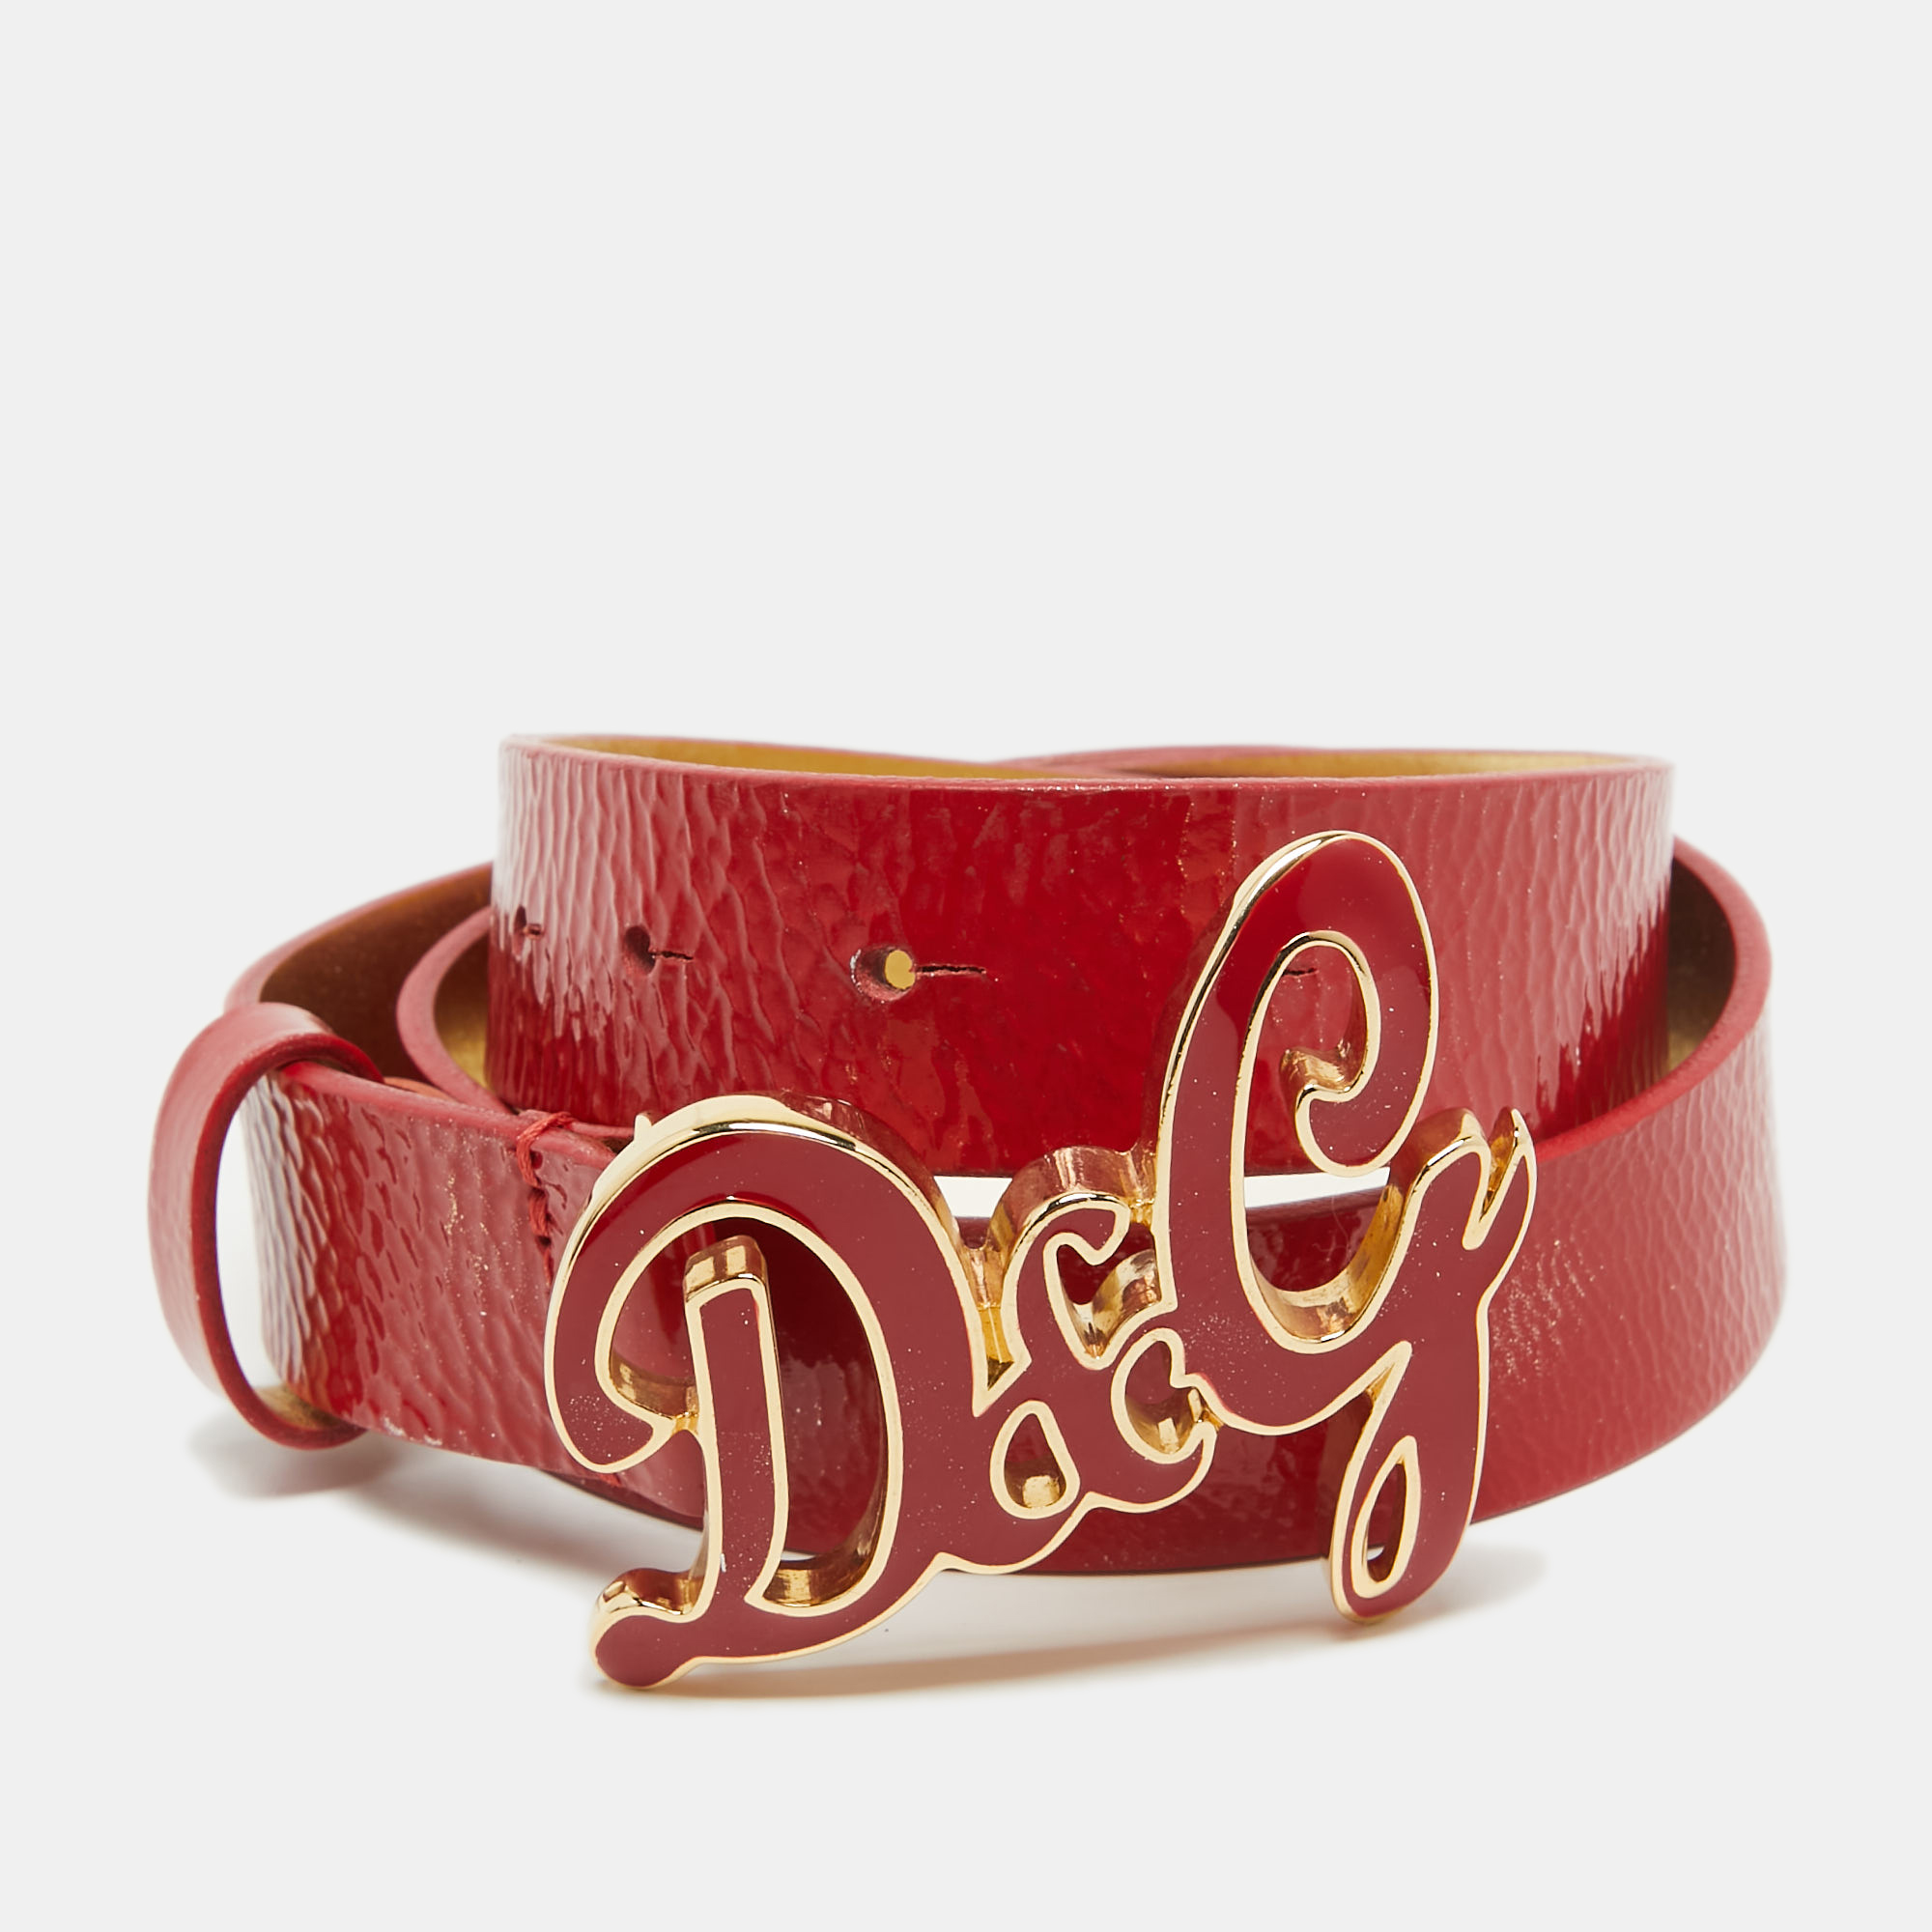 D&g red patent leather logo buckle belt 80 cm